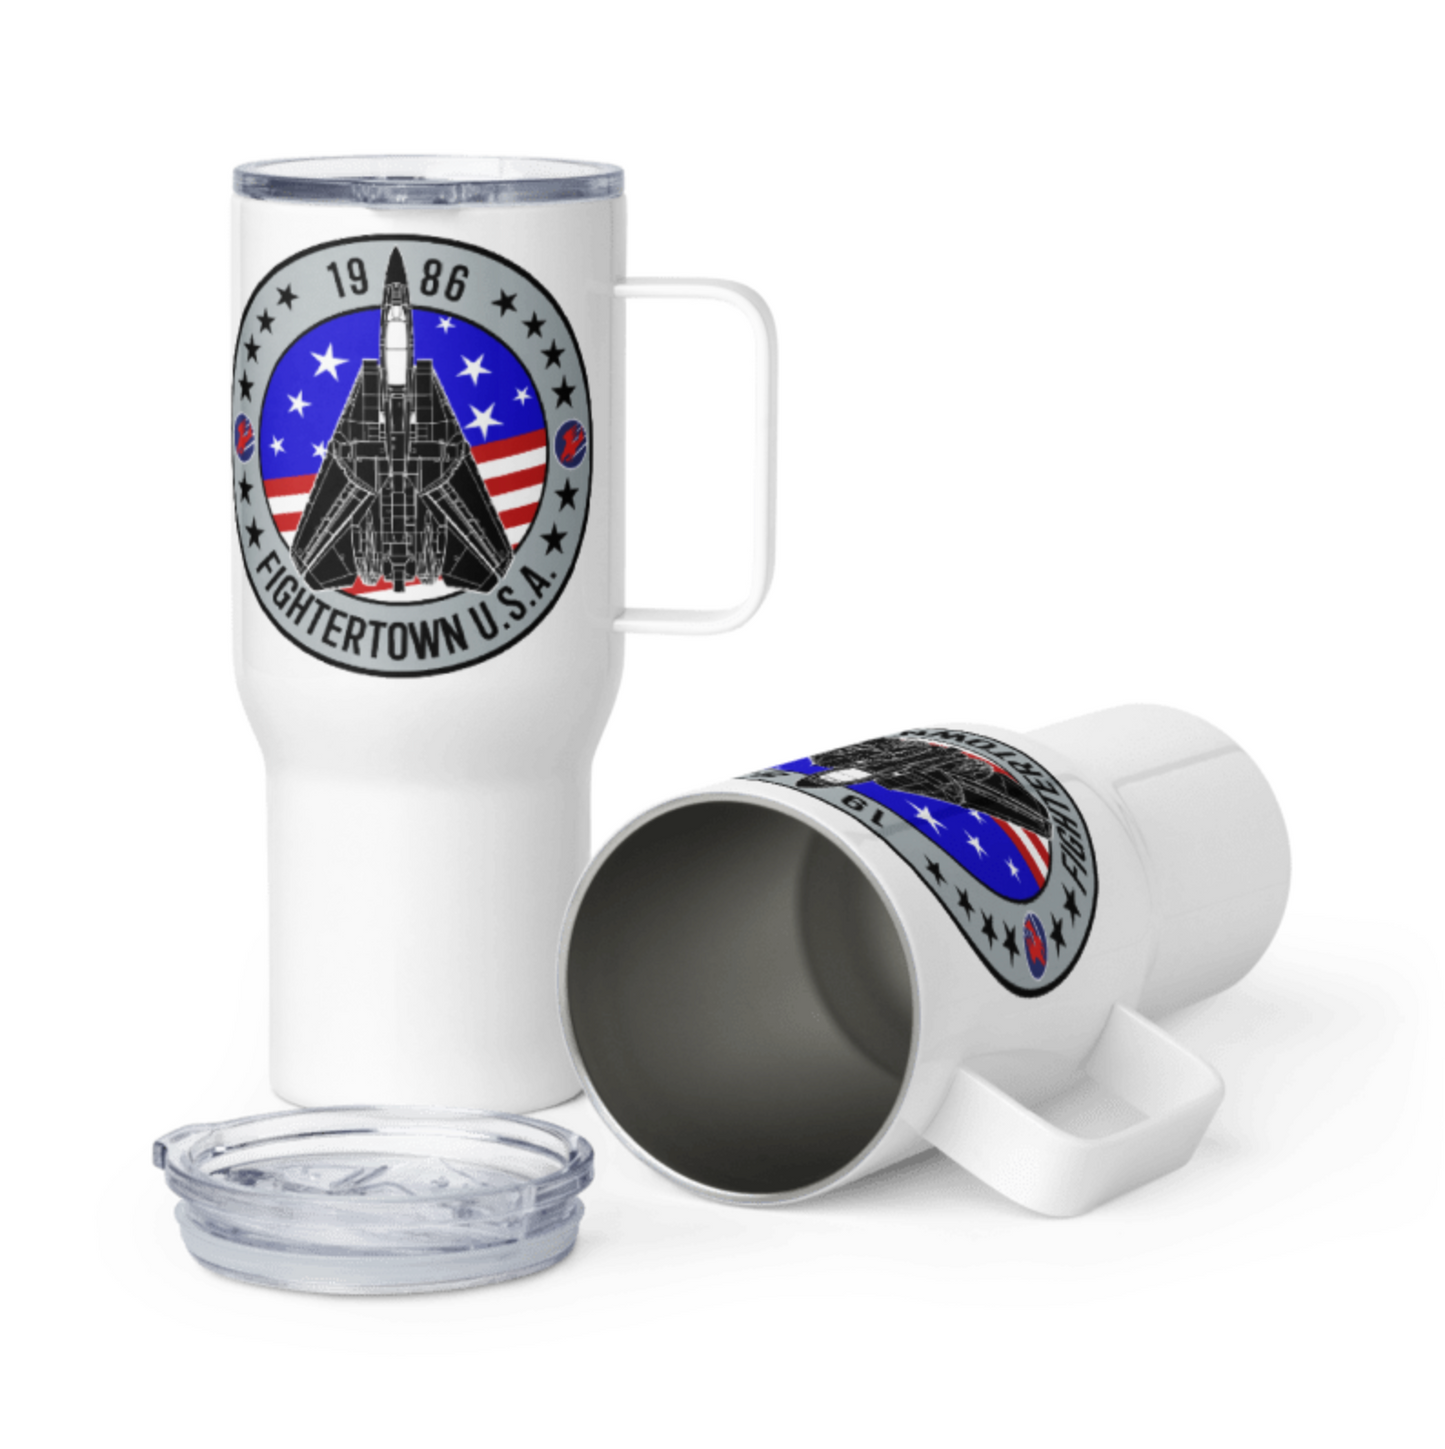 F-14 Tomcat Fightertown Travel mug with a handle